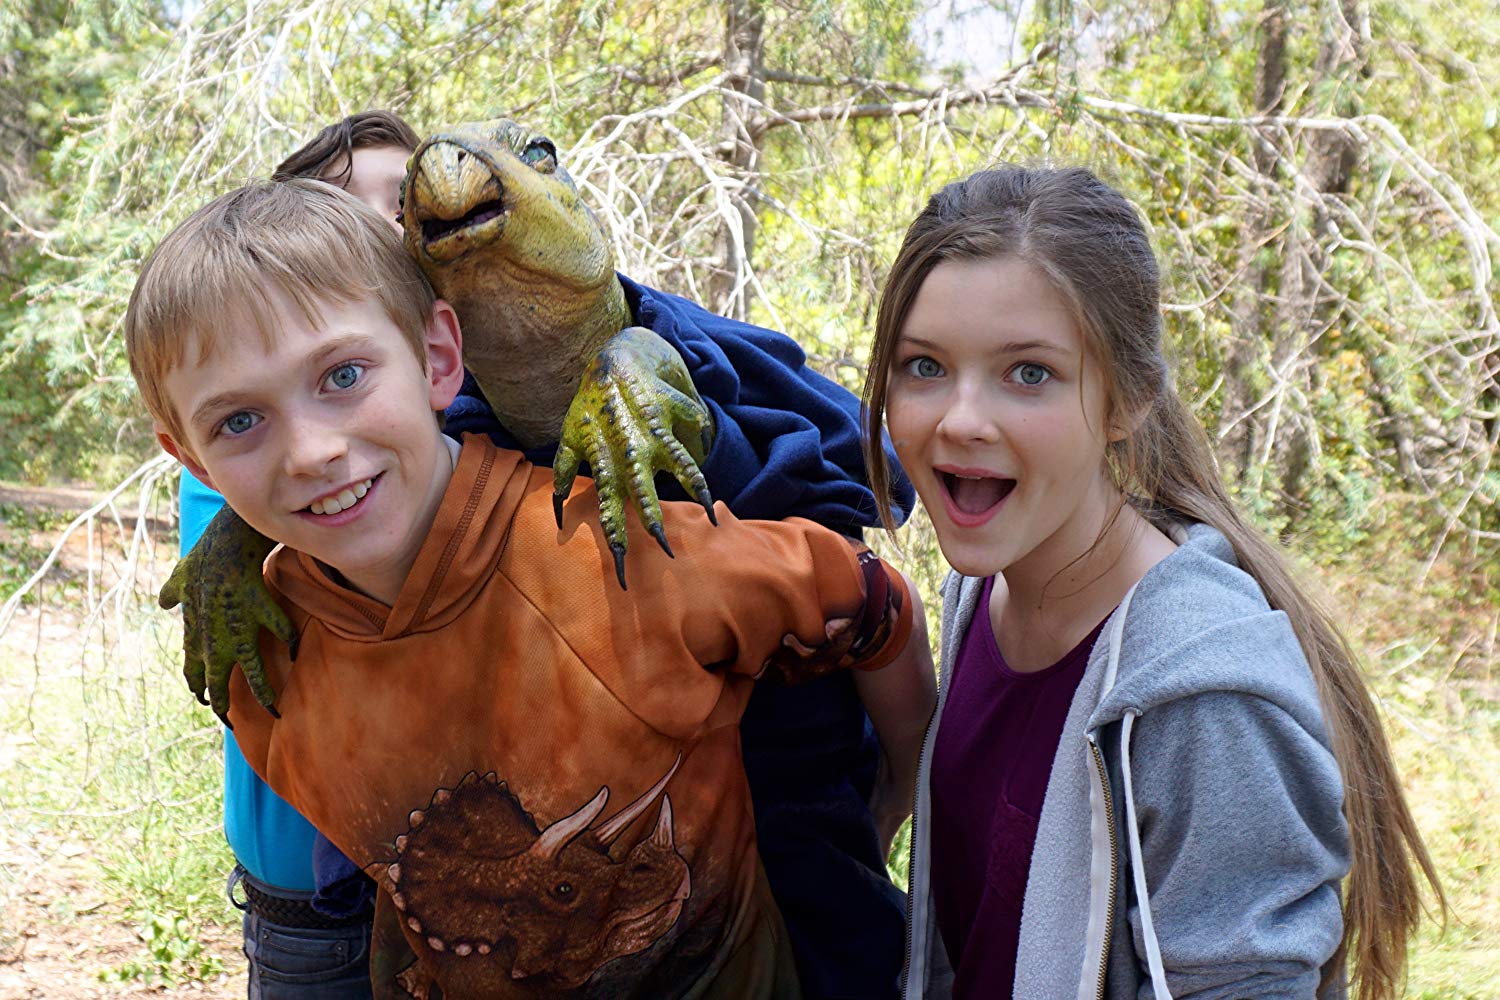 Young inventor Gabriel Bennett and his sister Amber Patino with Spike the dinosaur in Jurassic School (2017)